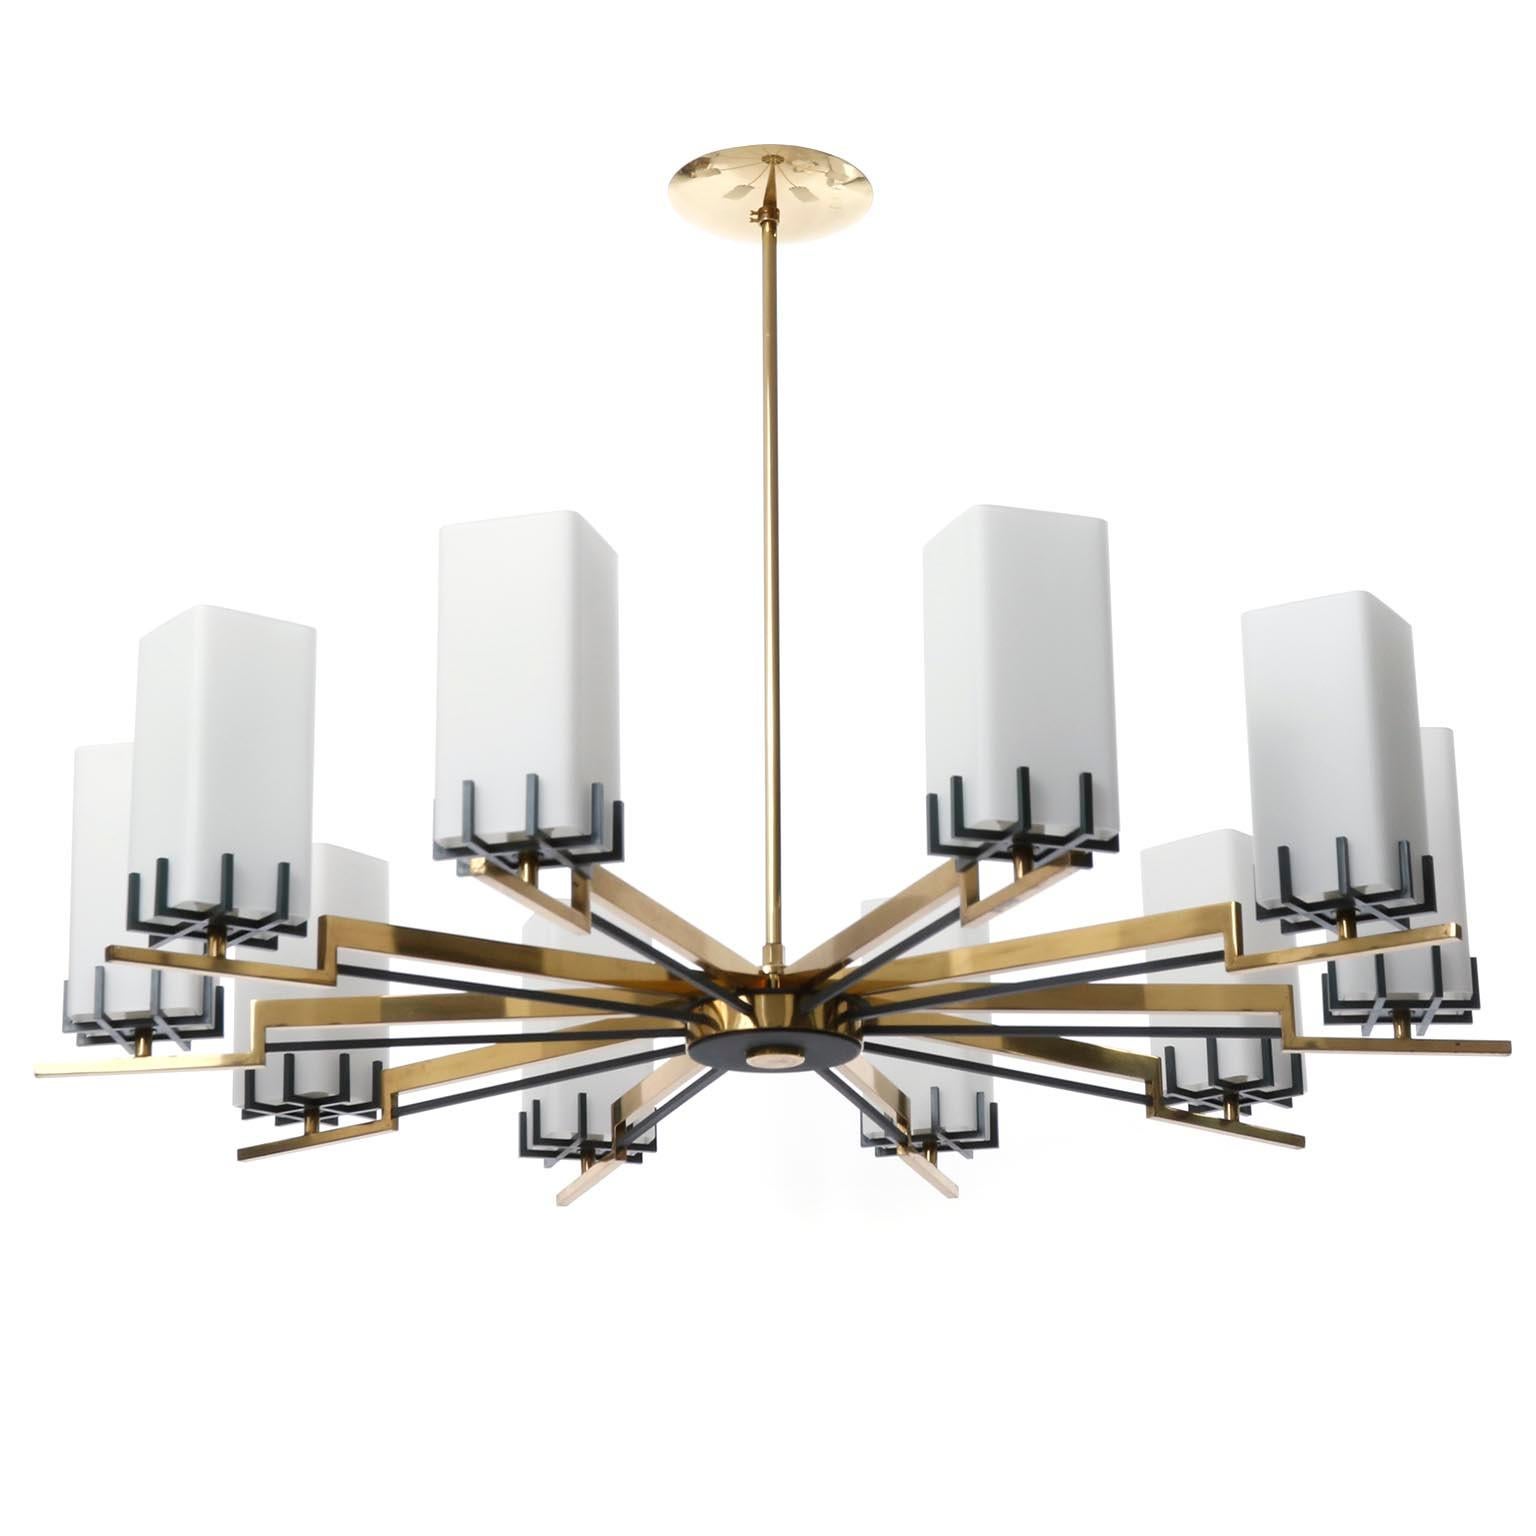 A large 8-arm chandelier manufactured by Rupert Nikoll, Austria, Vienna, in midcentury, crica 1960 (late 1950s or early 1960s).
The lamp consists of a solid and polished brass frame with black or anthracite-colored details and square glass tubes as